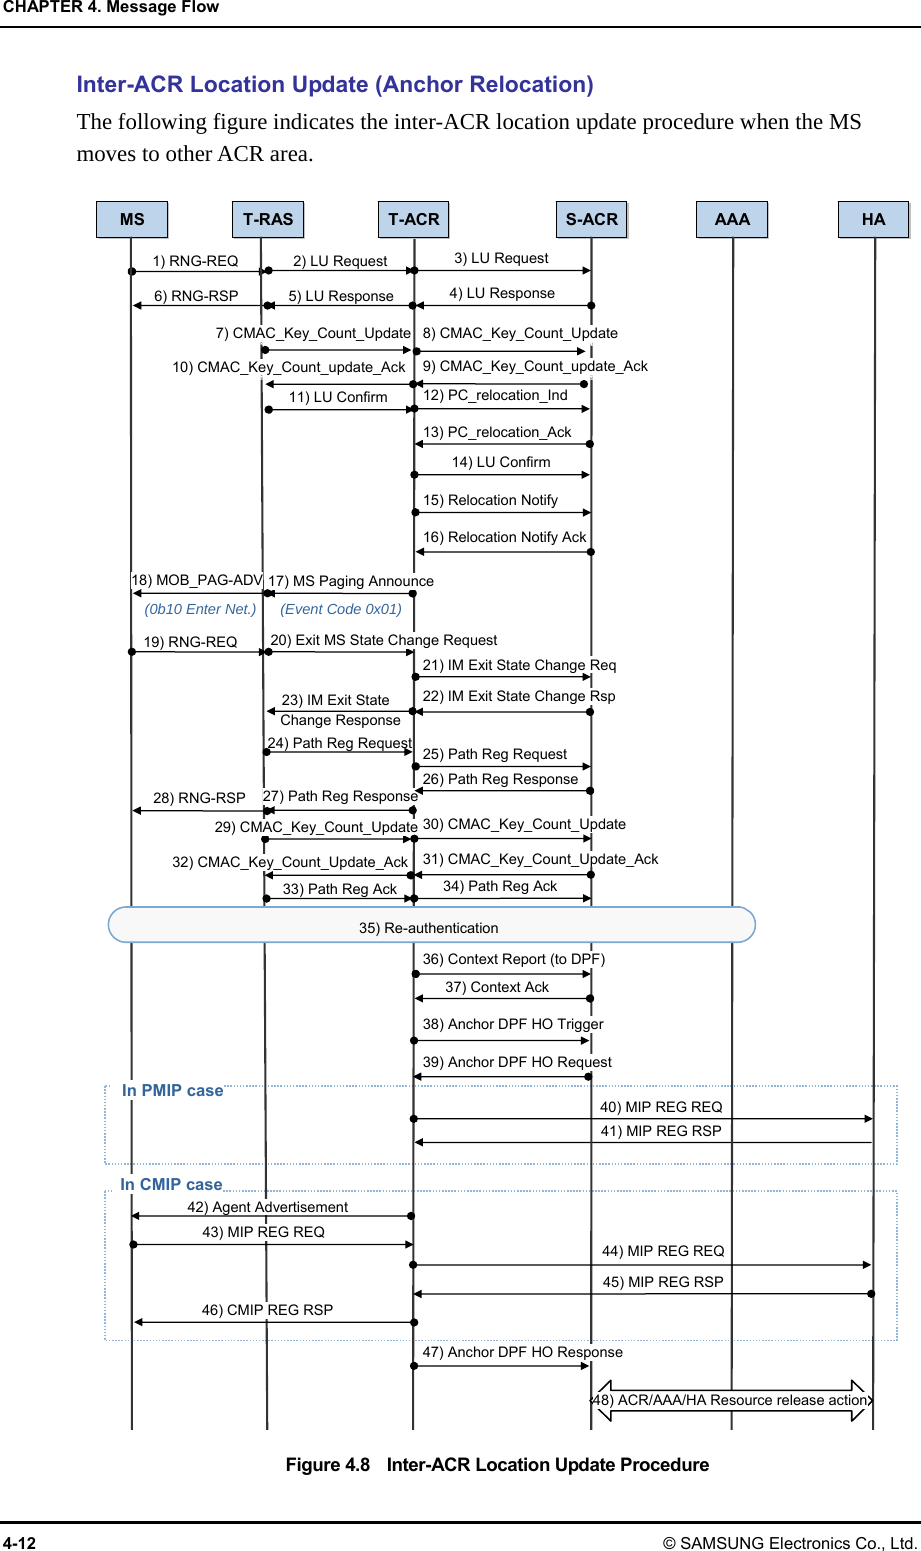 CHAPTER 4. Message Flow 4-12 © SAMSUNG Electronics Co., Ltd. Inter-ACR Location Update (Anchor Relocation) The following figure indicates the inter-ACR location update procedure when the MS moves to other ACR area.    Figure 4.8    Inter-ACR Location Update Procedure S-ACR AAA HA1) RNG-REQ 40) MIP REG REQ 41) MIP REG RSP 44) MIP REG REQ T-ACR2) LU Request 3) LU Request5) LU Response 4) LU Response11) LU Confirm14) LU Confirm12) PC_relocation_Ind 13) PC_relocation_Ack 15) Relocation Notify 38) Anchor DPF HO Trigger 16) Relocation Notify Ack 39) Anchor DPF HO Request 17) MS Paging Announce20) Exit MS State Change Request19) RNG-REQ18) MOB_PAG-ADV 28) RNG-RSP (0b10 Enter Net.) (Event Code 0x01)23) IM Exit State 21) IM Exit State Change Req 22) IM Exit State Change Rsp 24) Path Reg Request 33) Path Reg Ack 27) Path Reg Response 26) Path Reg Response 25) Path Reg Request 37) Context Ack 36) Context Report (to DPF) 35) Re-authentication In PMIP caseIn CMIP case42) Agent Advertisement 43) MIP REG REQ 45) MIP REG RSP 46) CMIP REG RSP 47) Anchor DPF HO Response 48) ACR/AAA/HA Resource release action 6) RNG-RSP MS T-RAS Change Response 29) CMAC_Key_Count_Update32) CMAC_Key_Count_Update_Ack30) CMAC_Key_Count_Update 31) CMAC_Key_Count_Update_Ack 34) Path Reg Ack 7) CMAC_Key_Count_Update10) CMAC_Key_Count_update_Ack8) CMAC_Key_Count_Update 9) CMAC_Key_Count_update_Ack